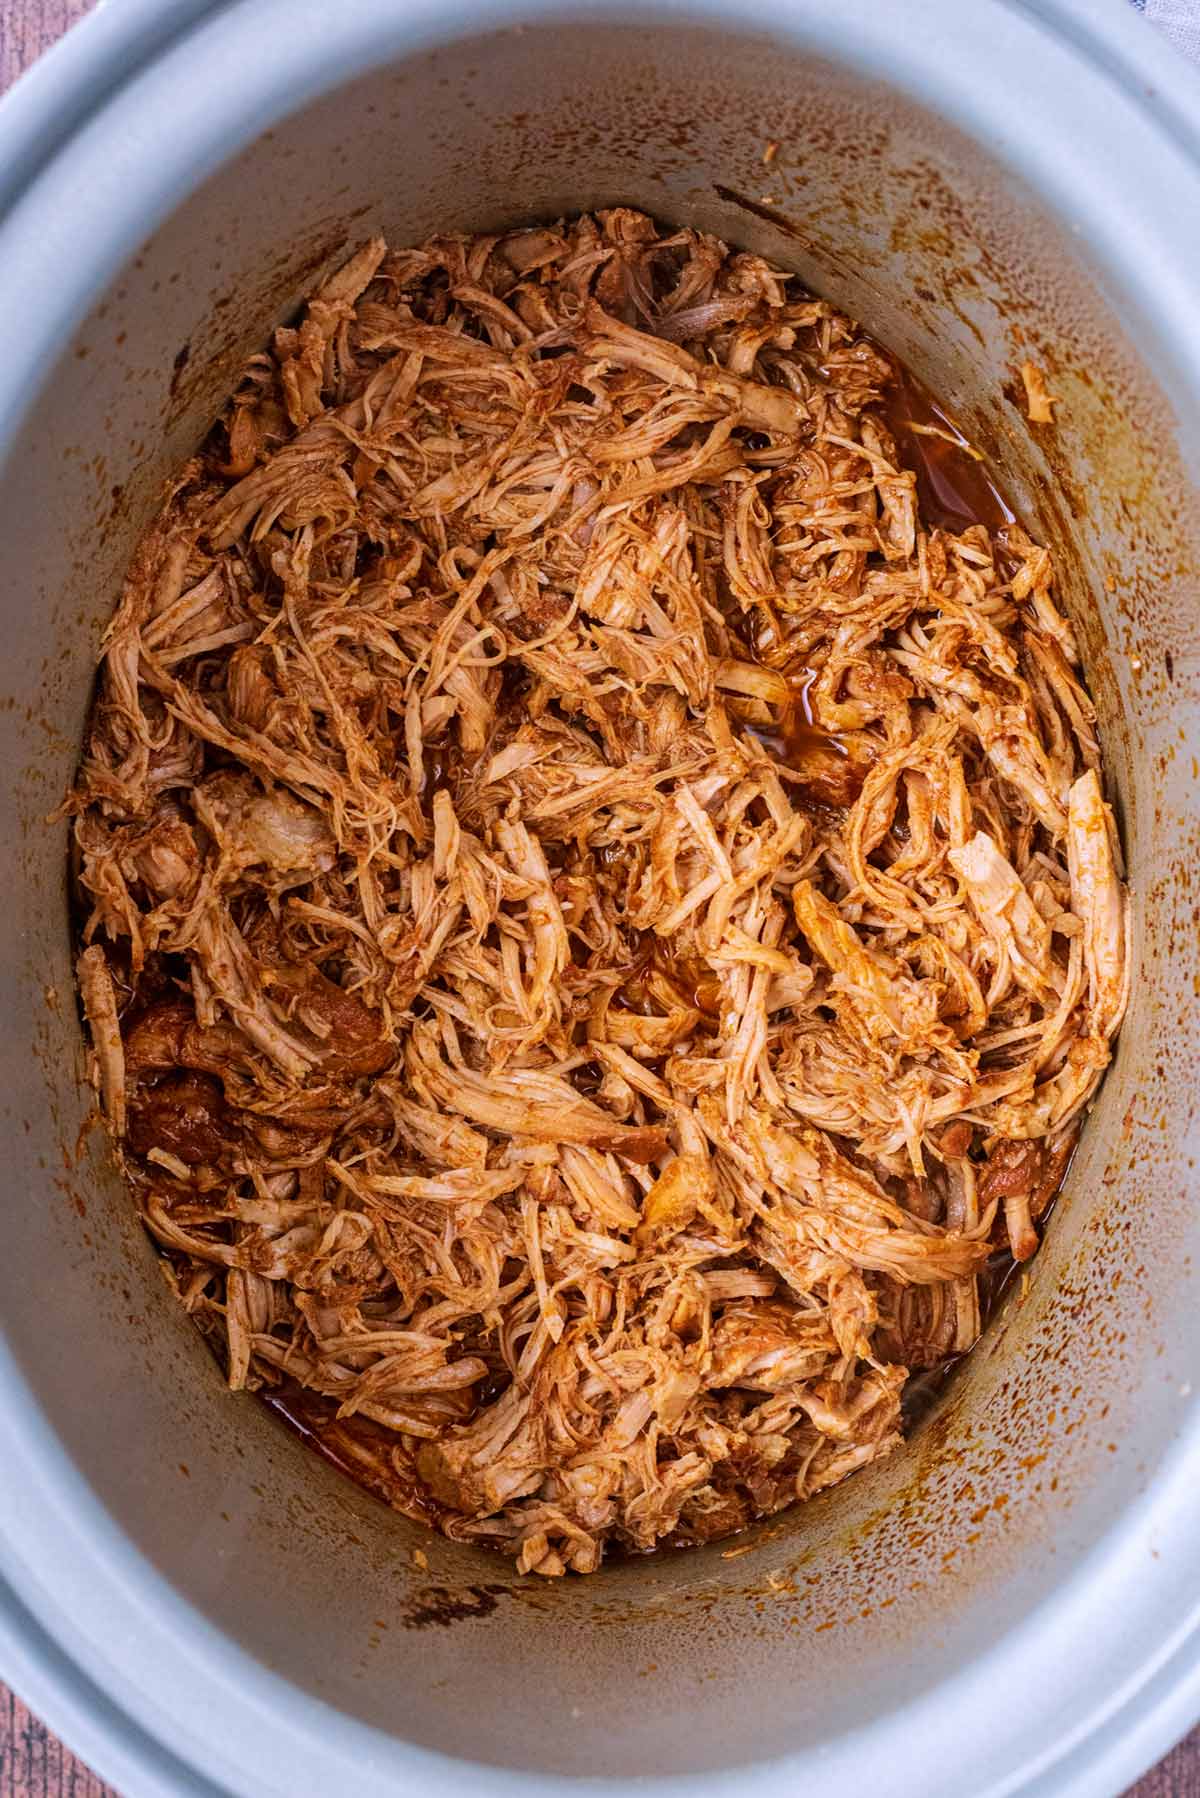 Pulled pork in a slow cooker bowl.